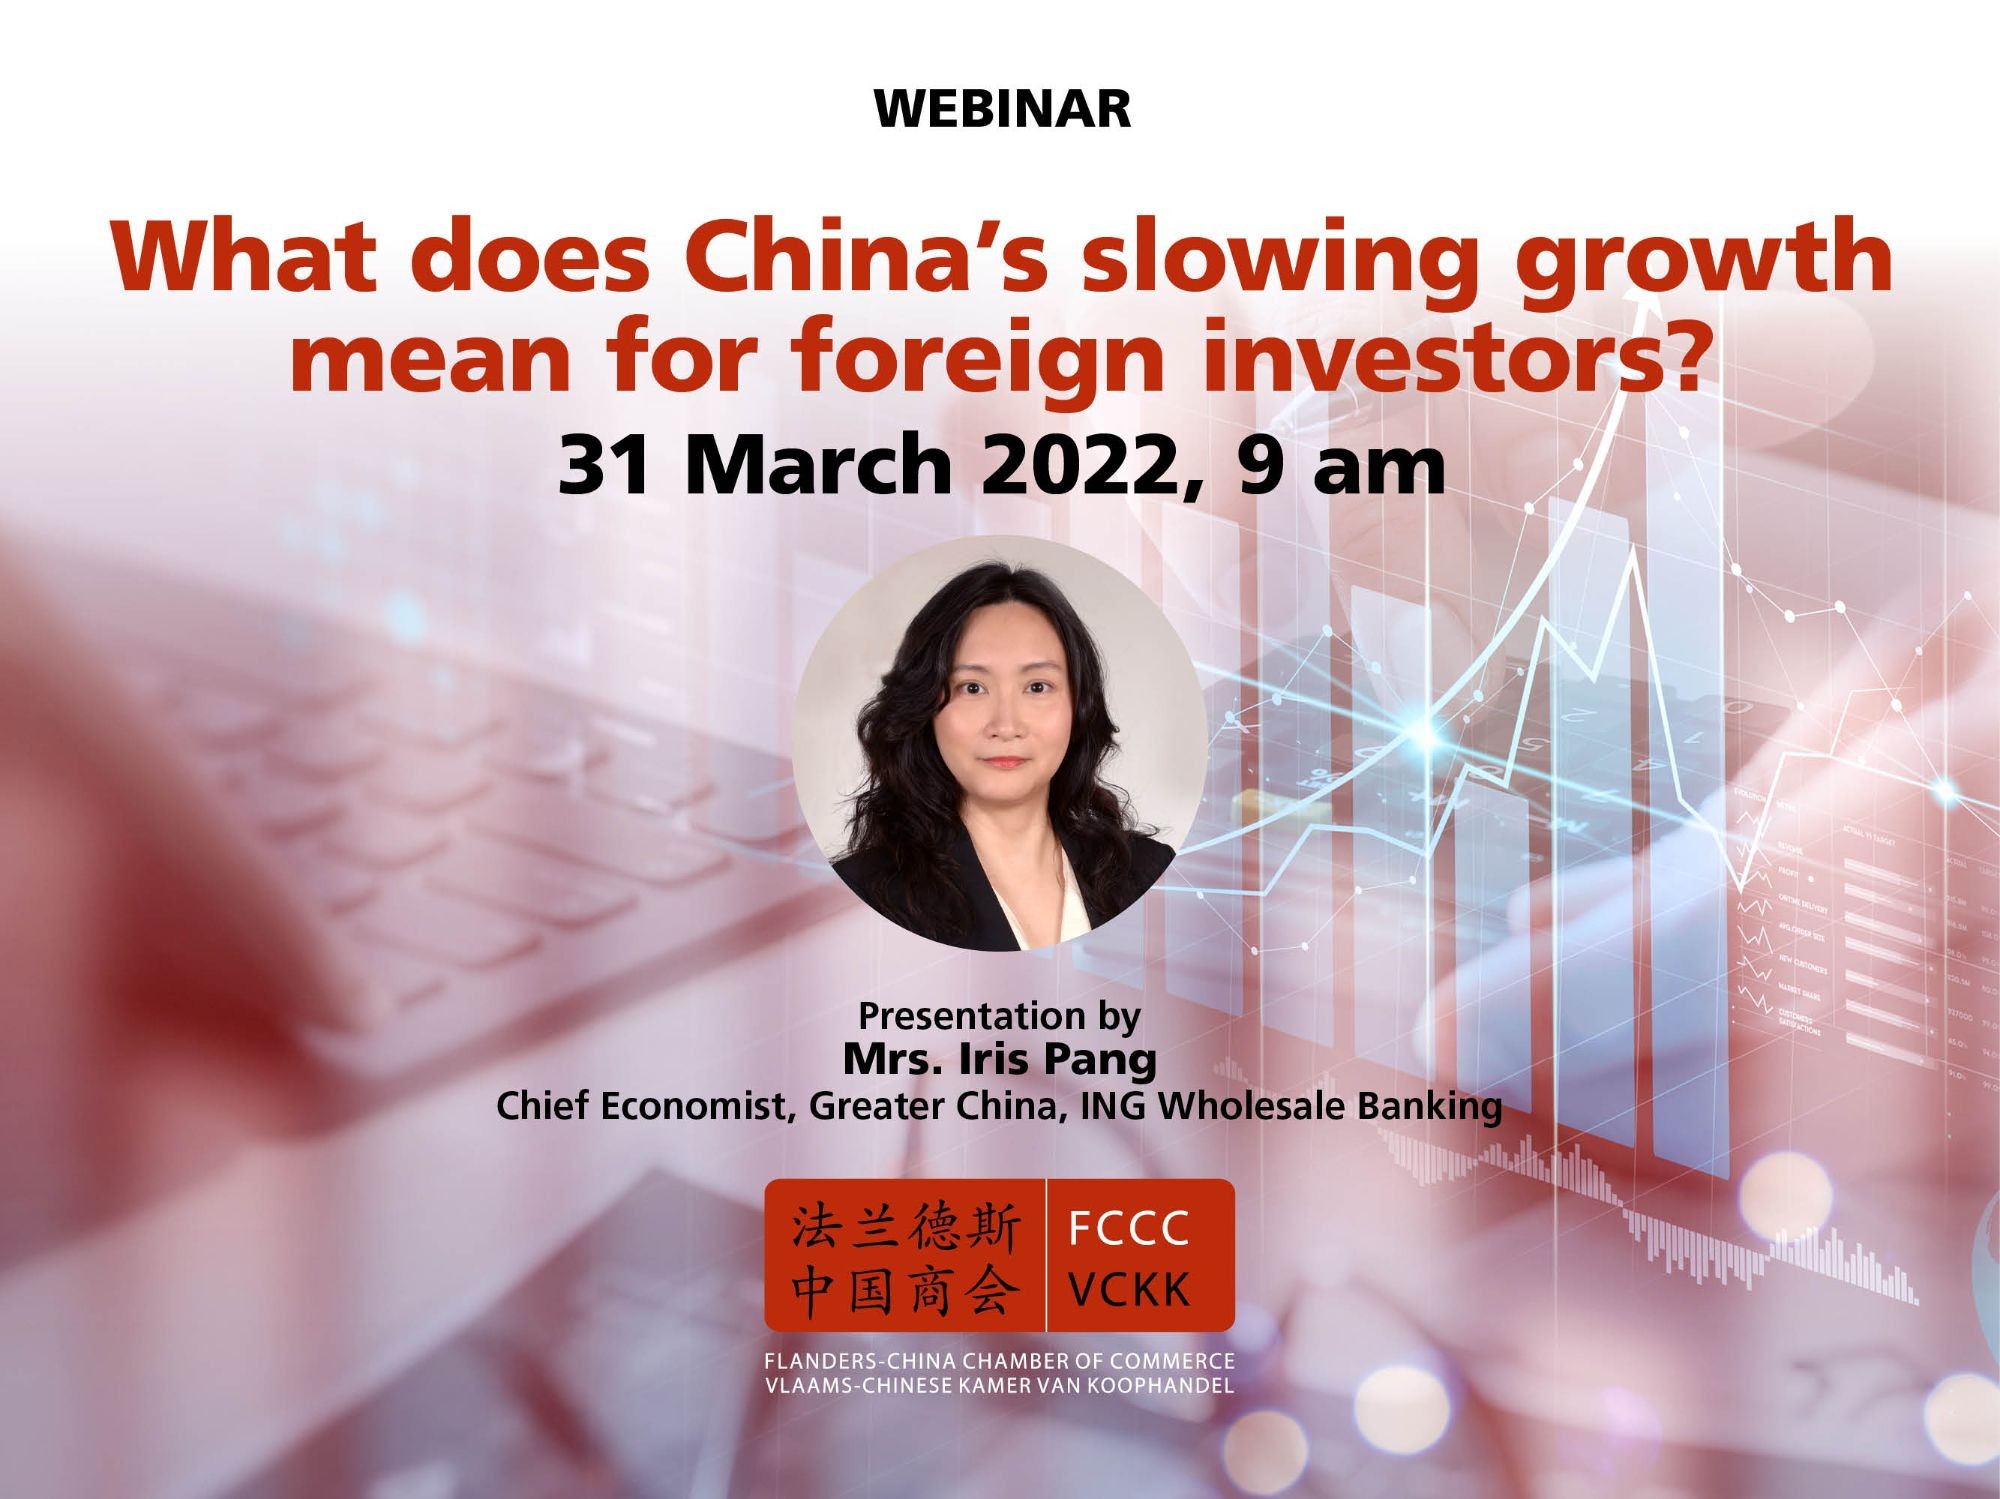 Webinar: What does China’s slowing growth mean for foreign investors?